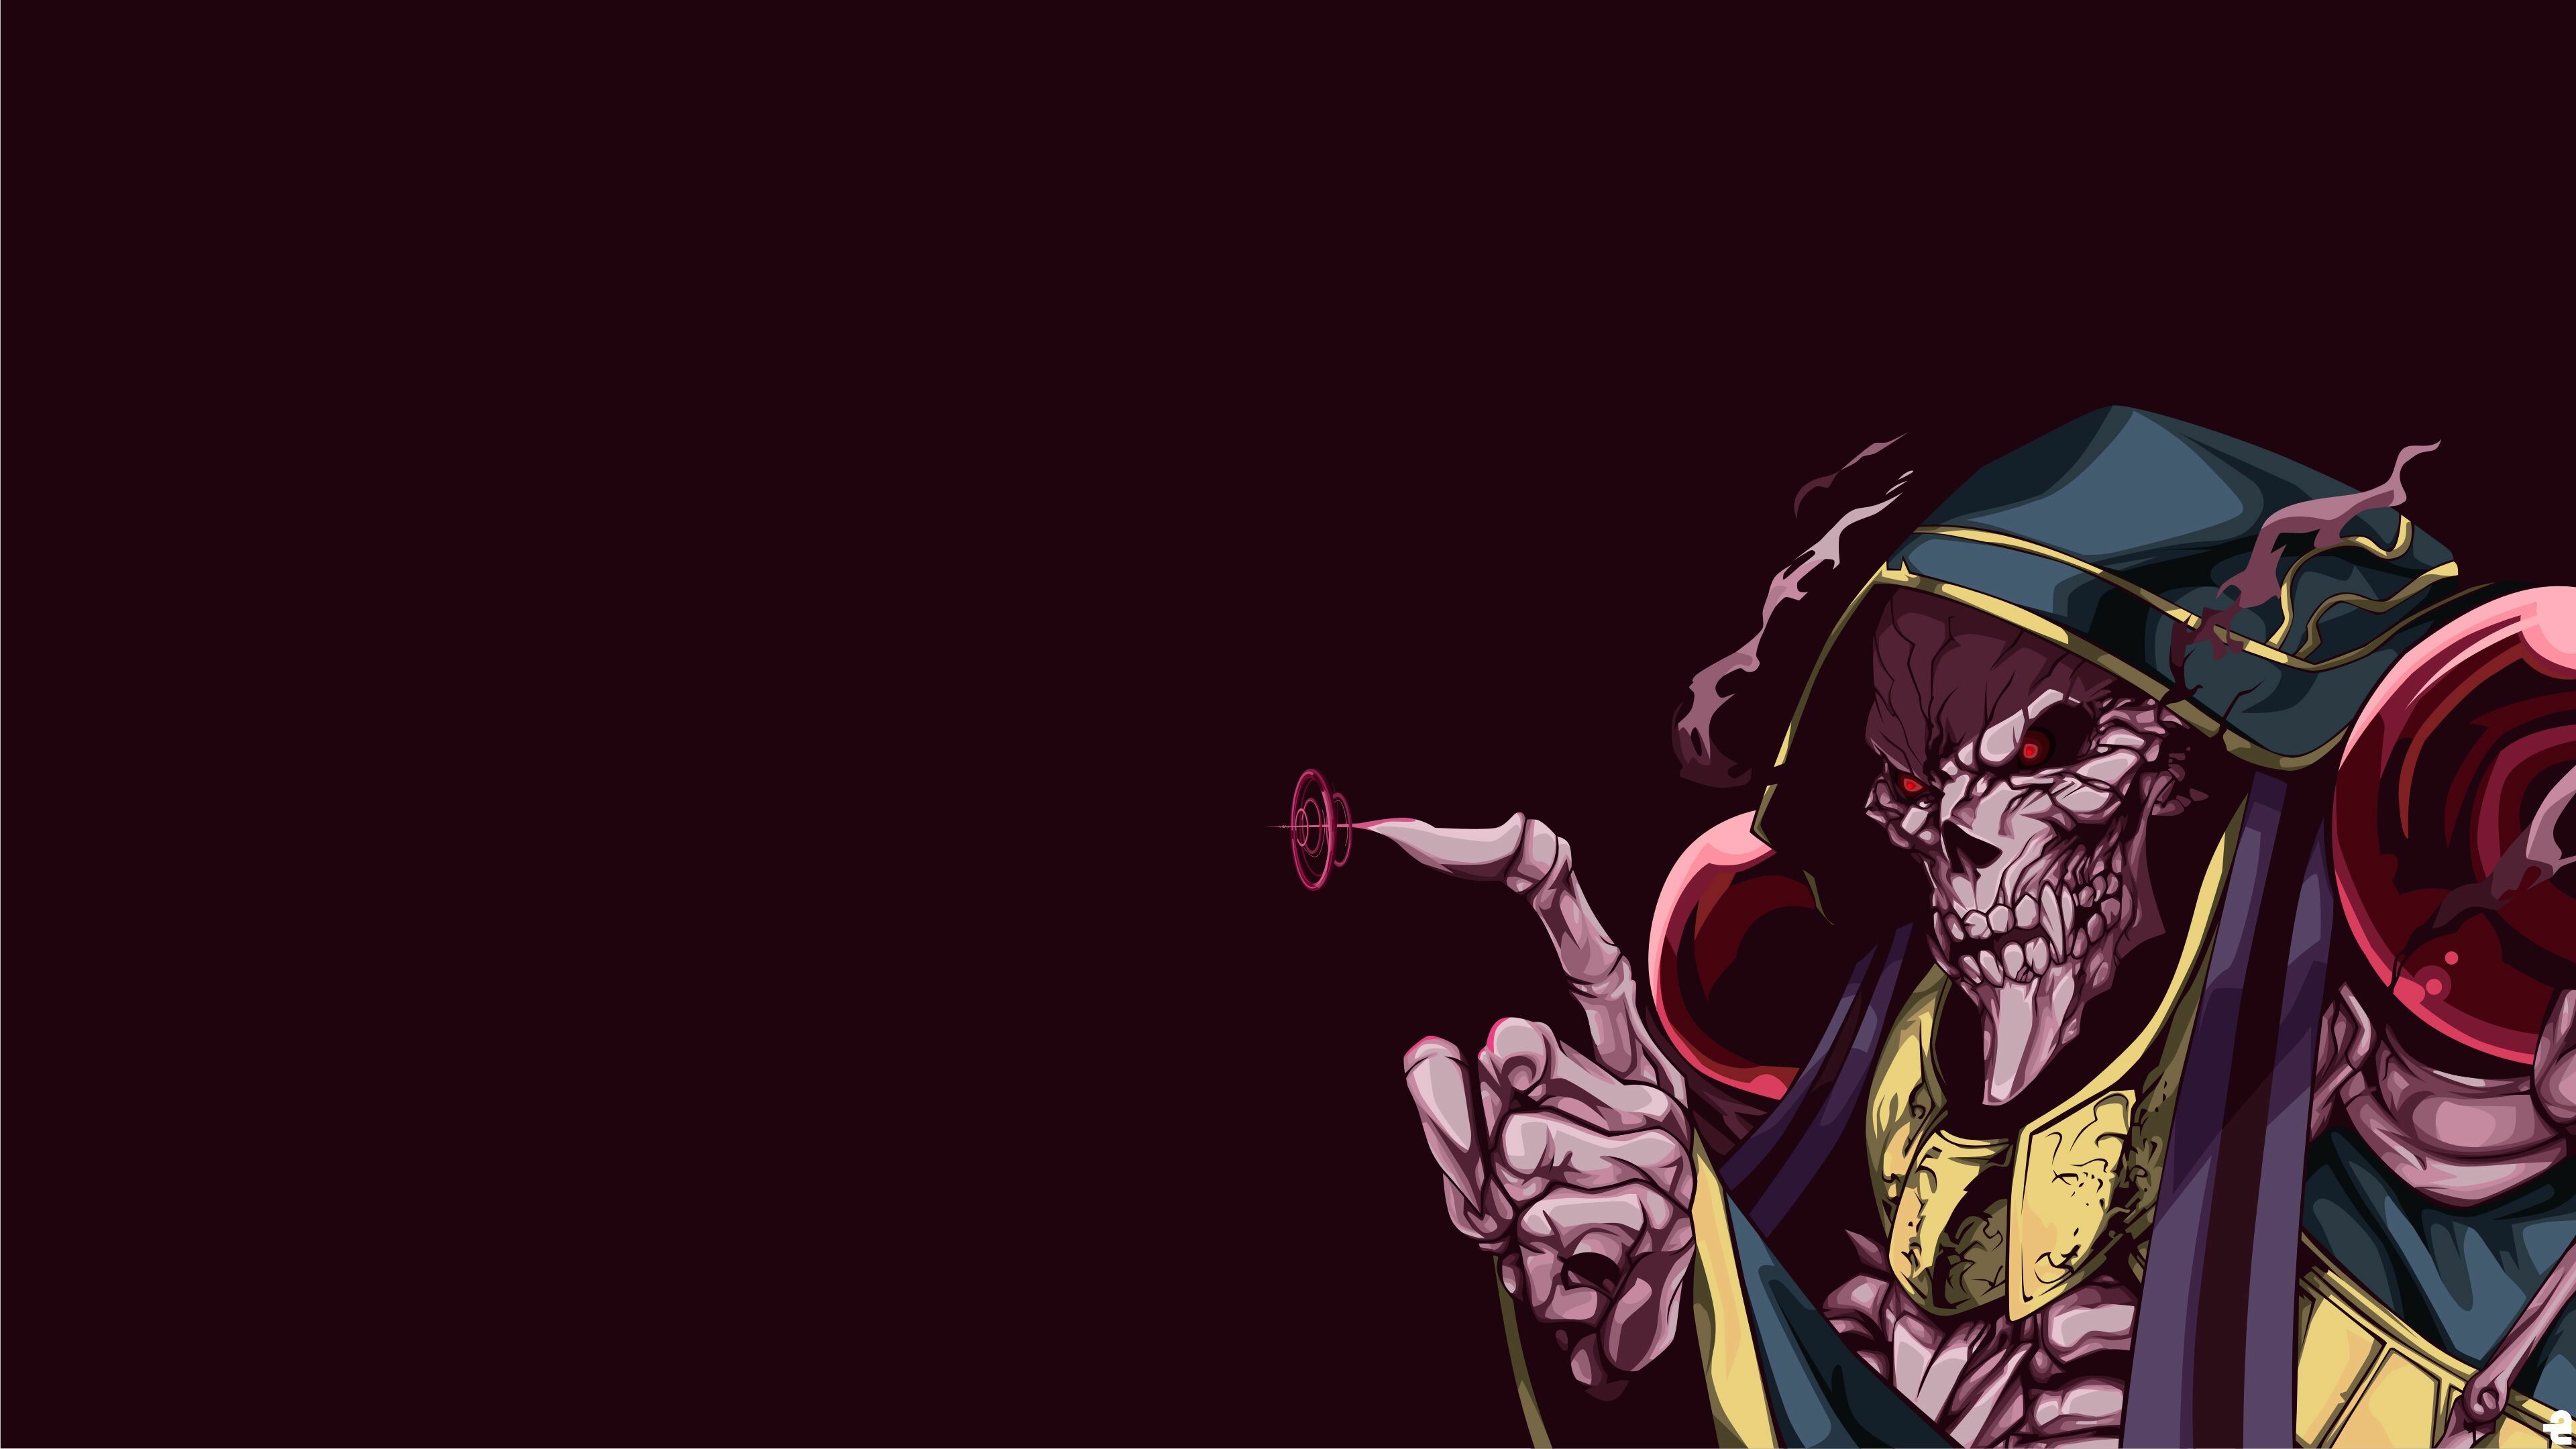 Overlord: Ainz Ooal Gown, formerly known as Momonga, The main protagonist, Anime. 3840x2160 4K Wallpaper.